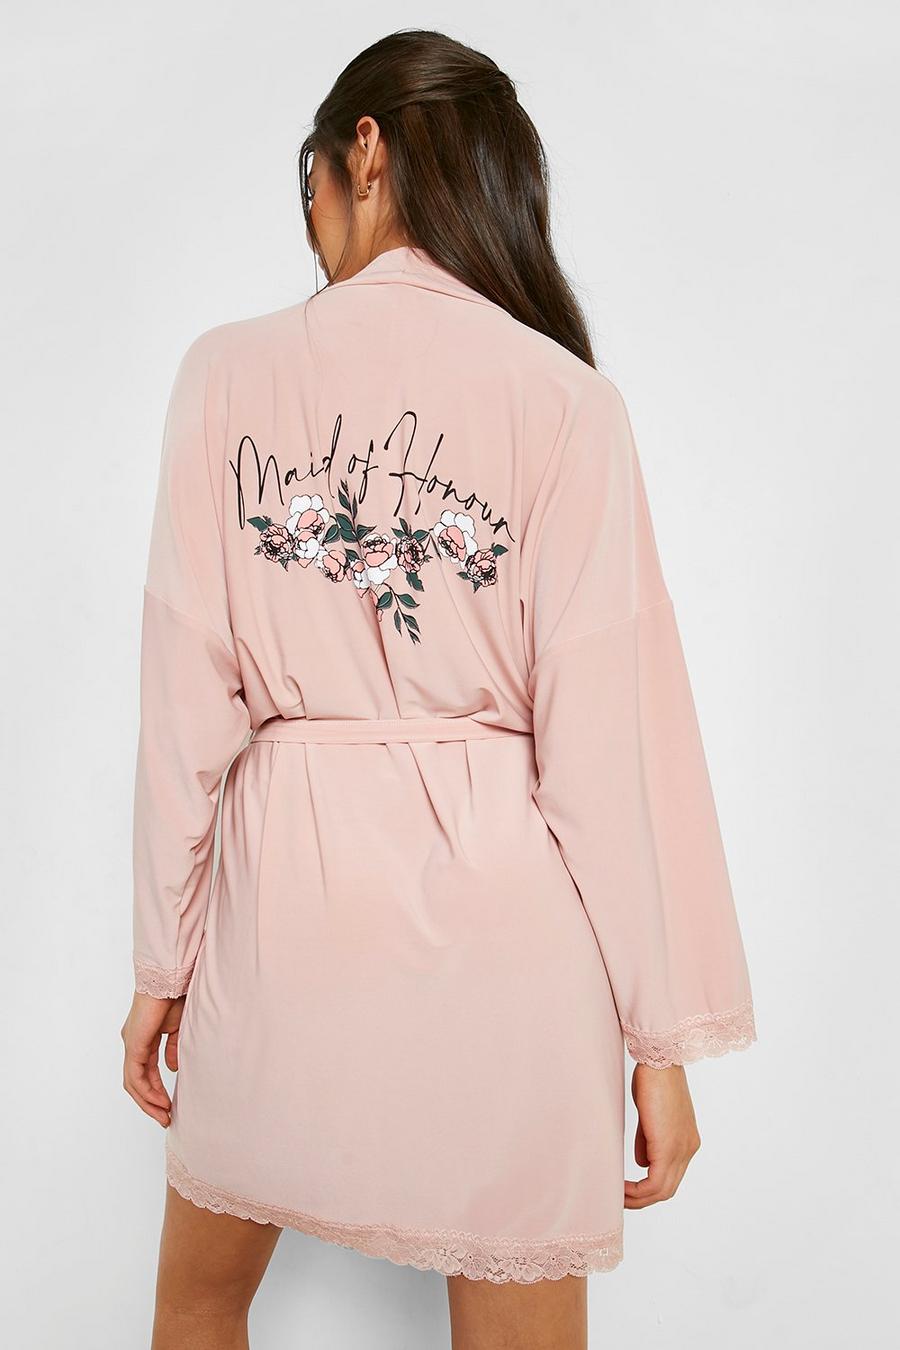 Blush pink Maid Of Honor Floral Lace Trim Robe